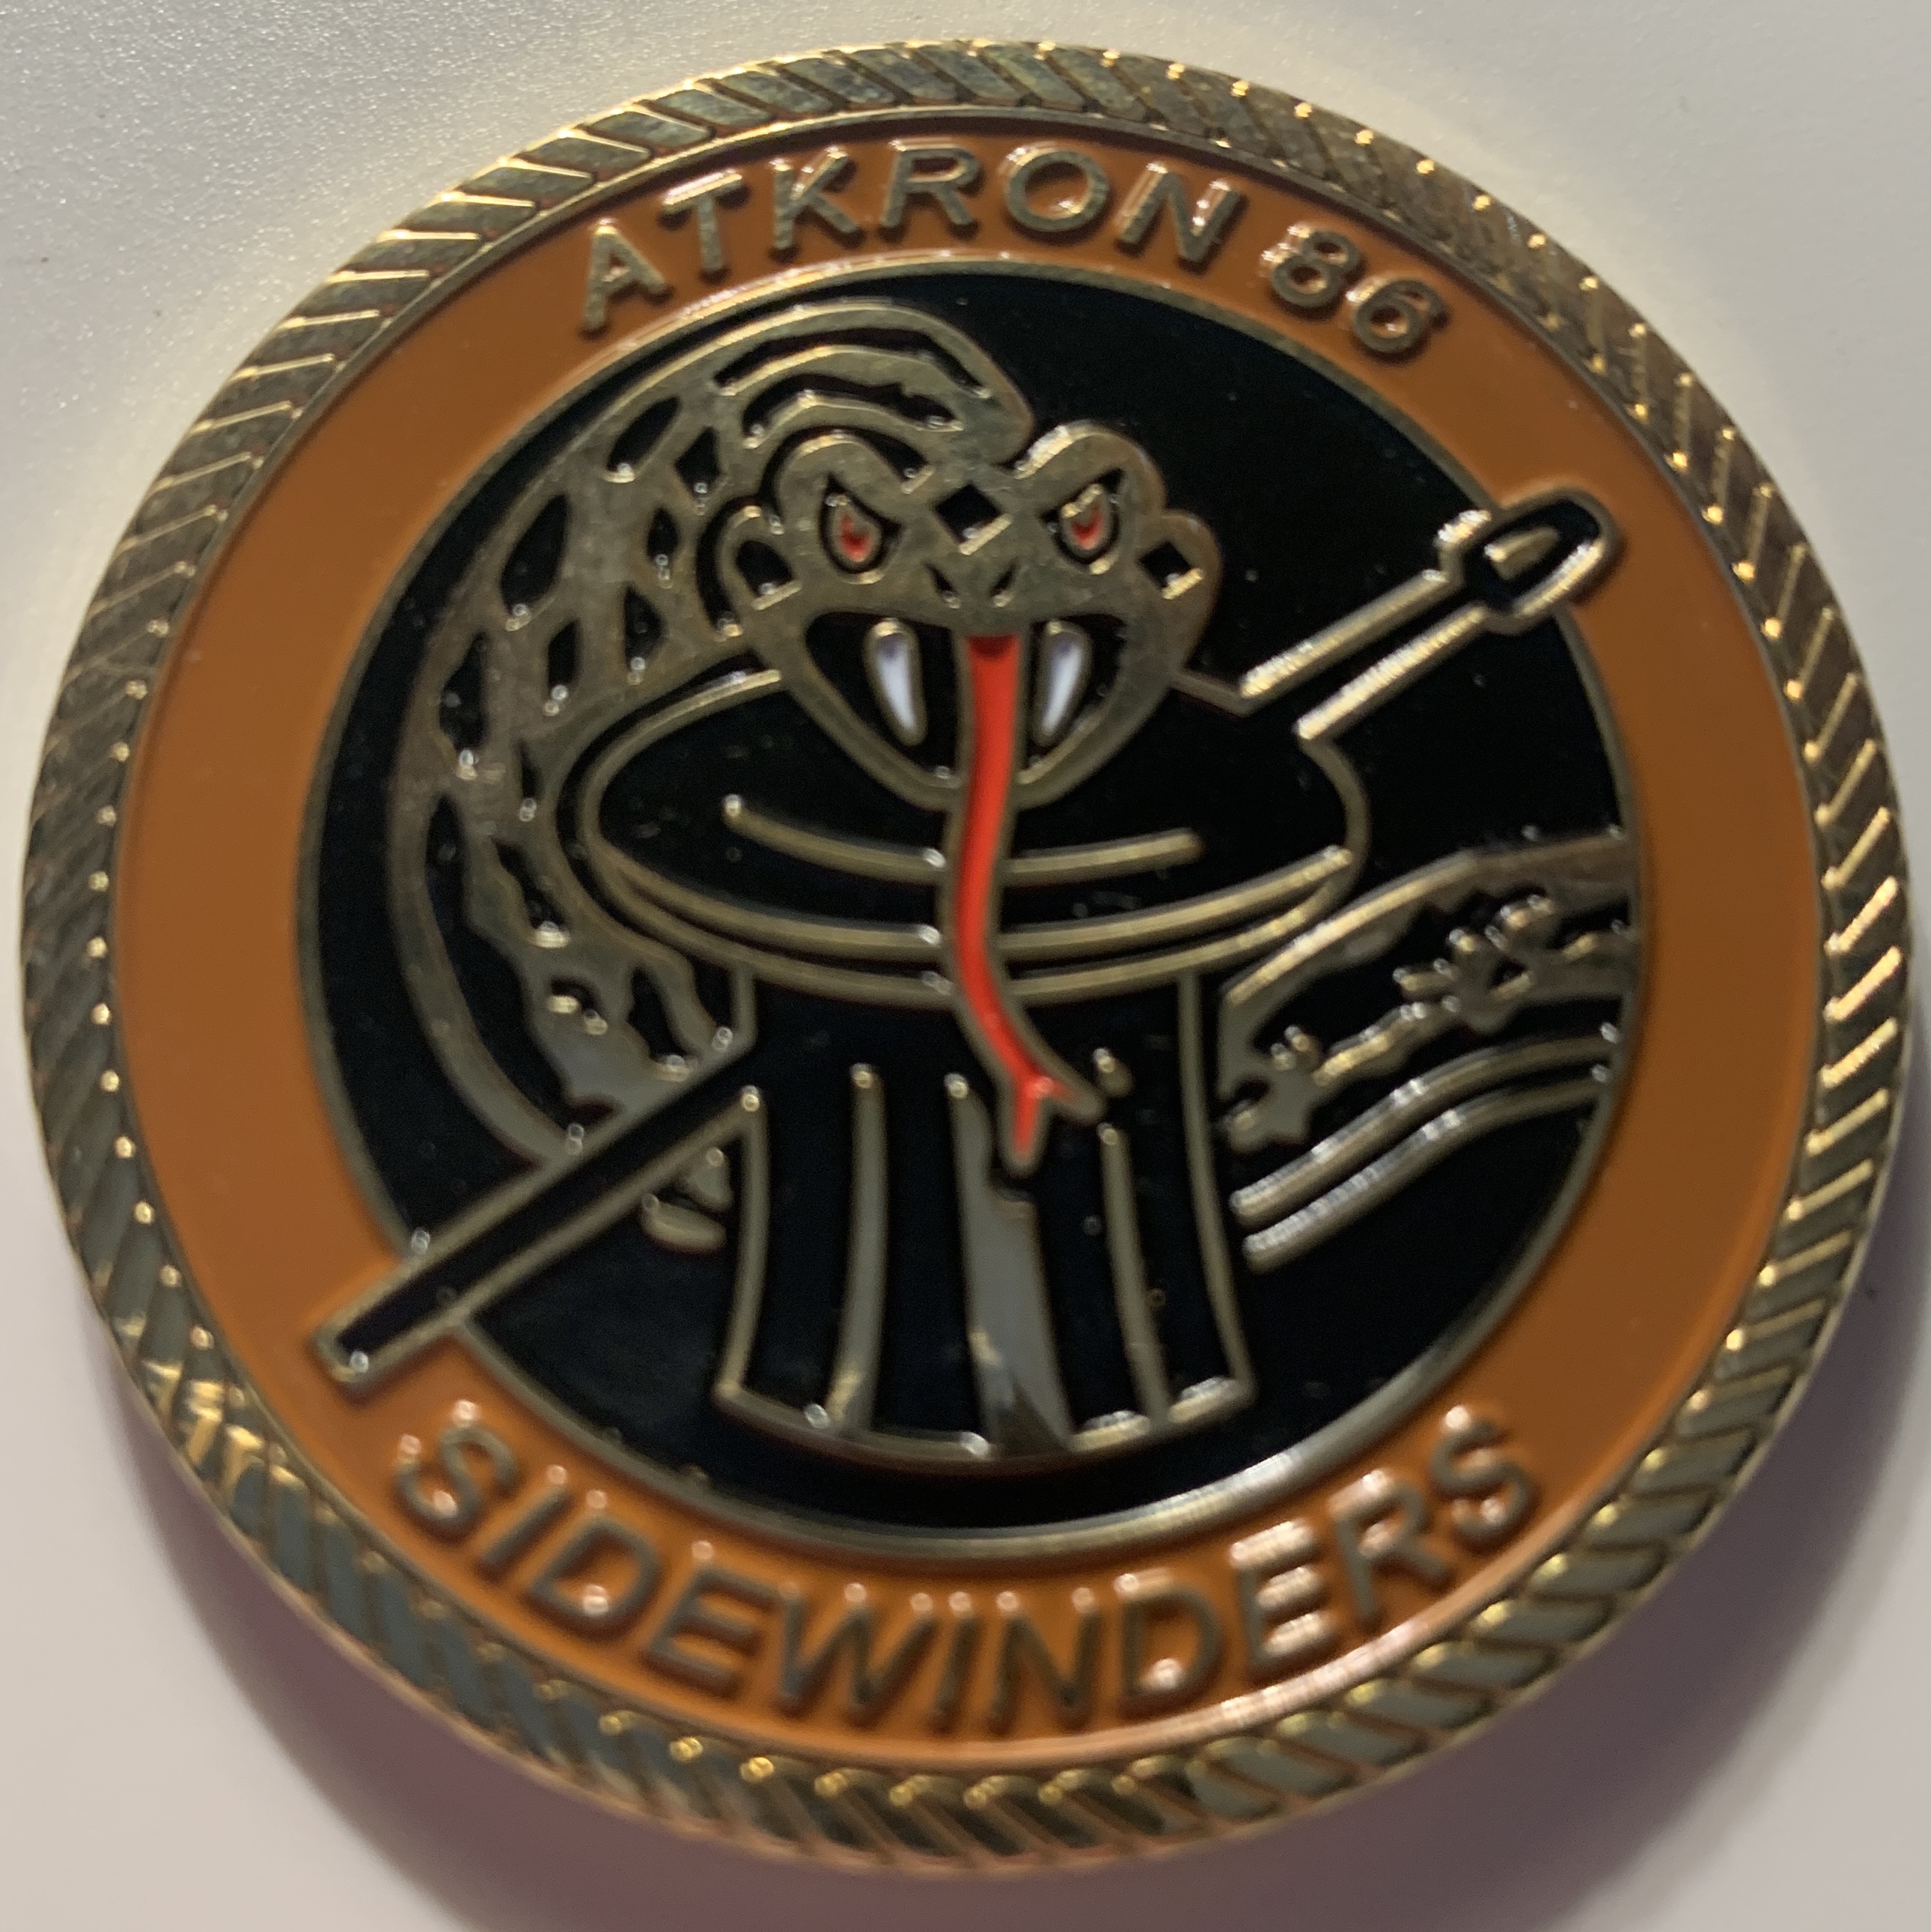 A-7E / VA-86 'SIDEWINDERS' Coin (Front)